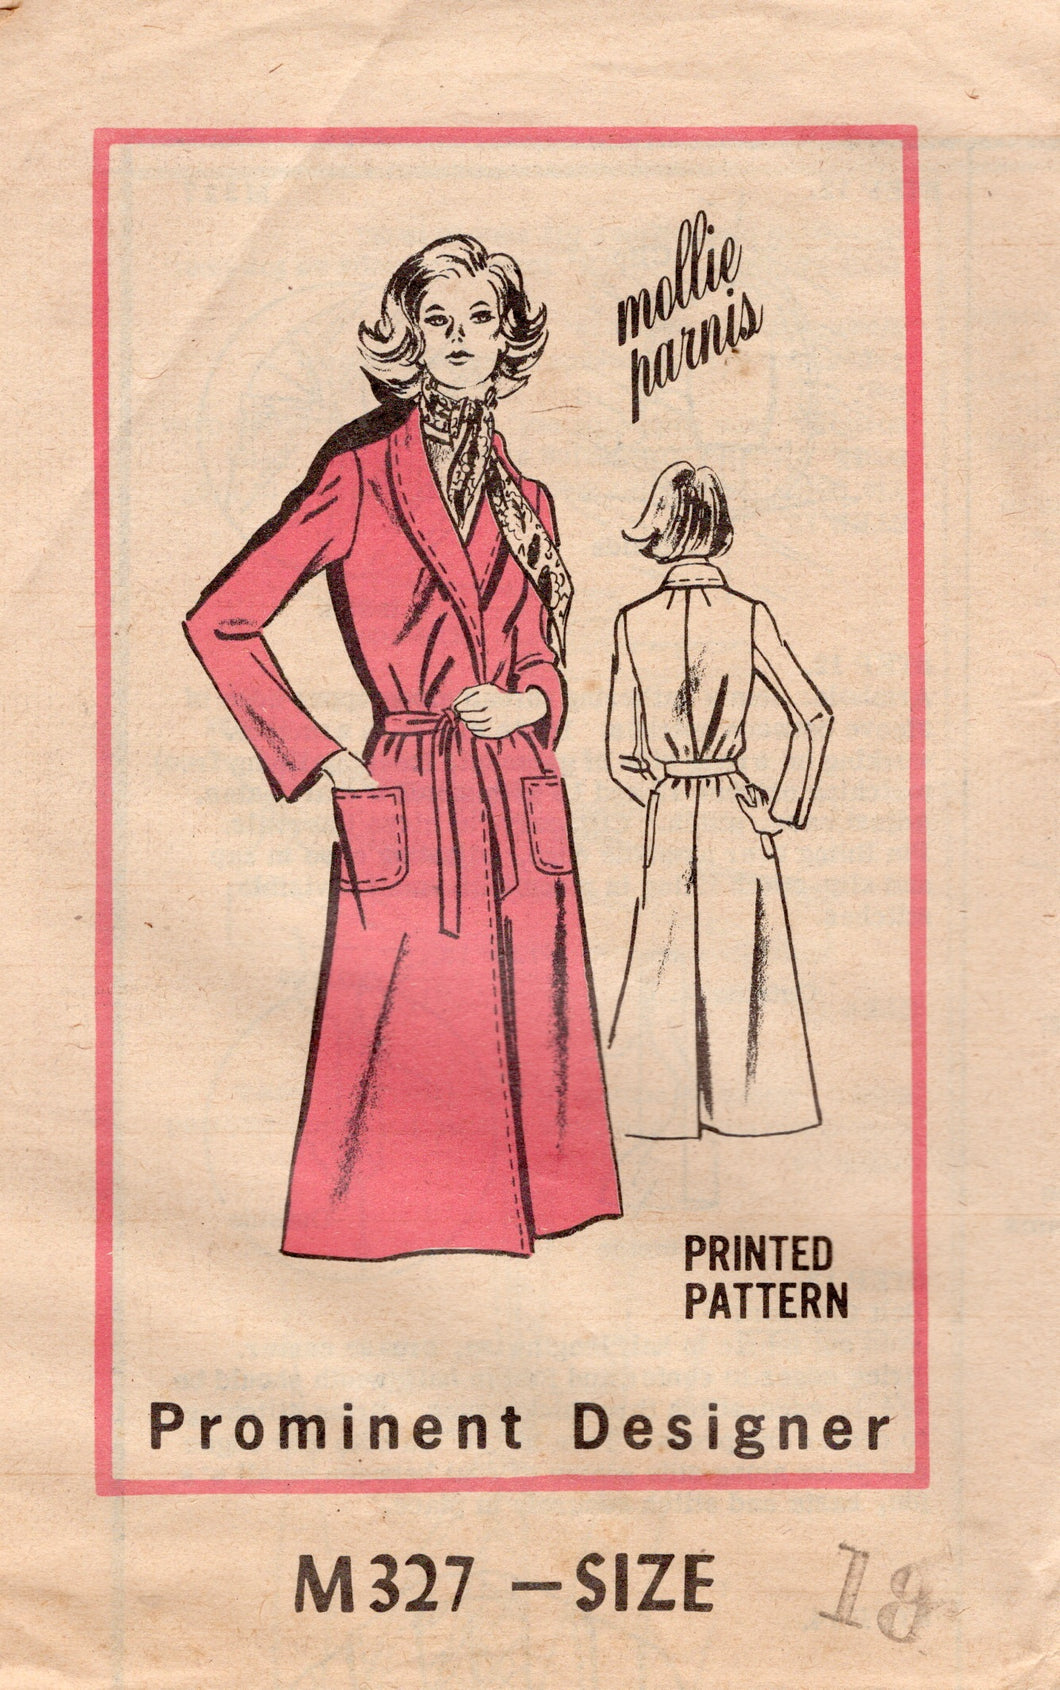 1970's Mail Order Prominent Designer Collection Coat or Jacket Pattern - Mollie Parnis - Bust 40